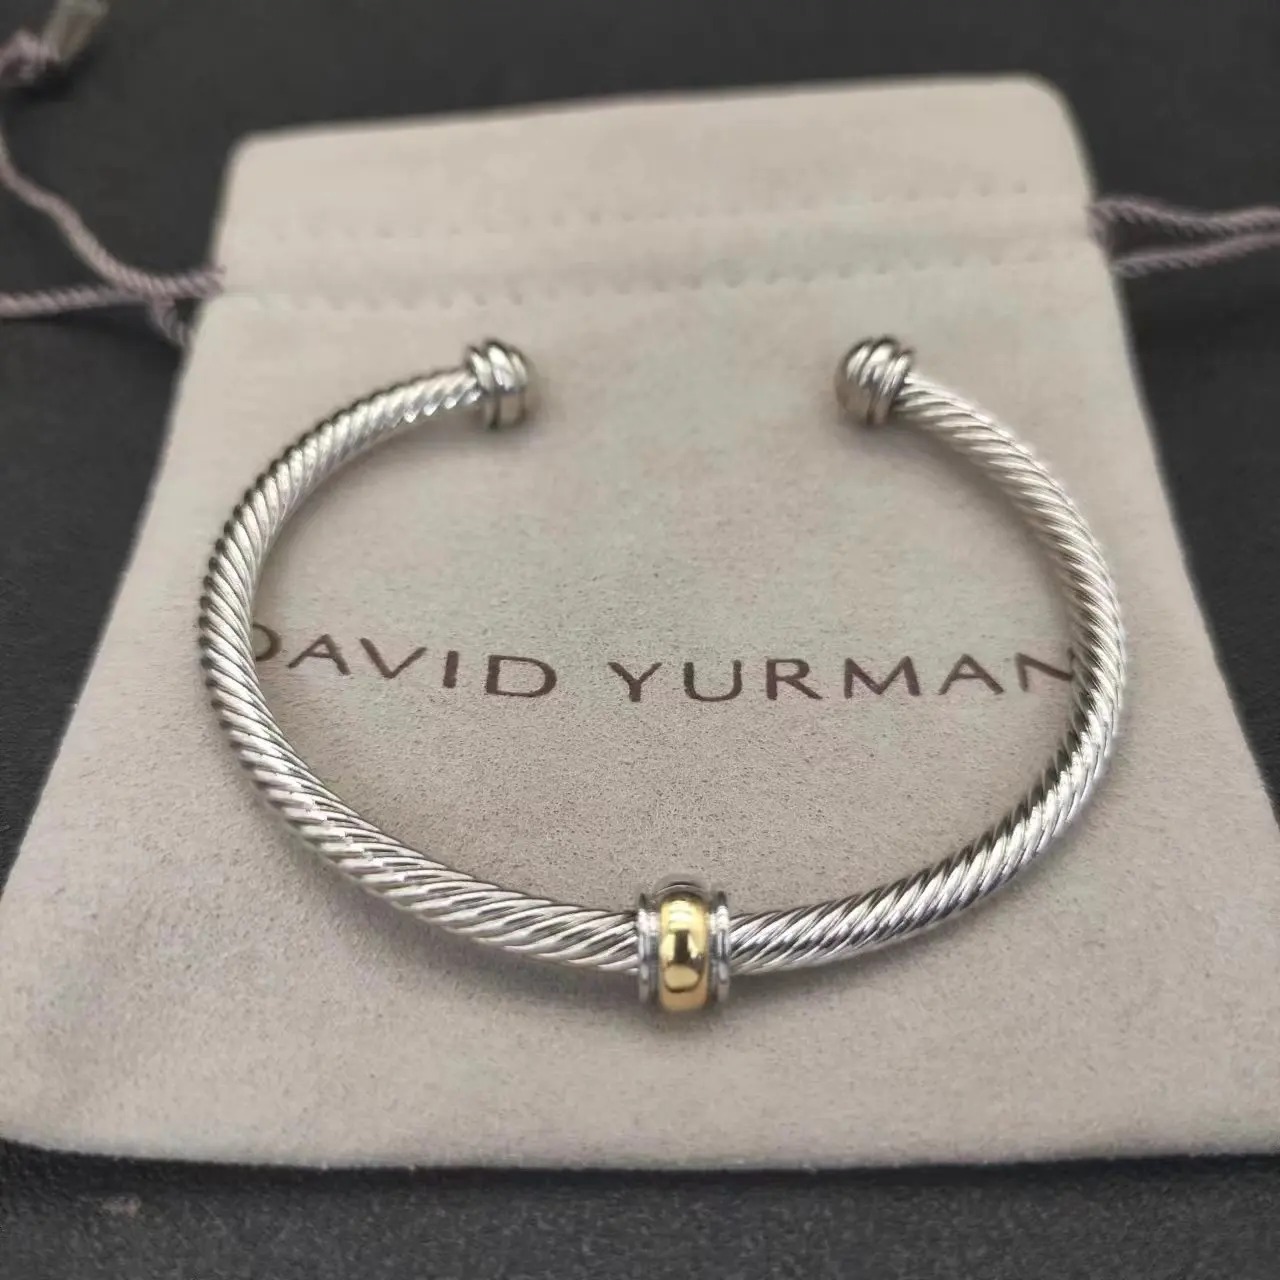 

High Quality Men's 4mm Bracelet David Yurman Cable Classic BuckleBracelet With 14k Gold 925 Sterling Silver Free Shipping